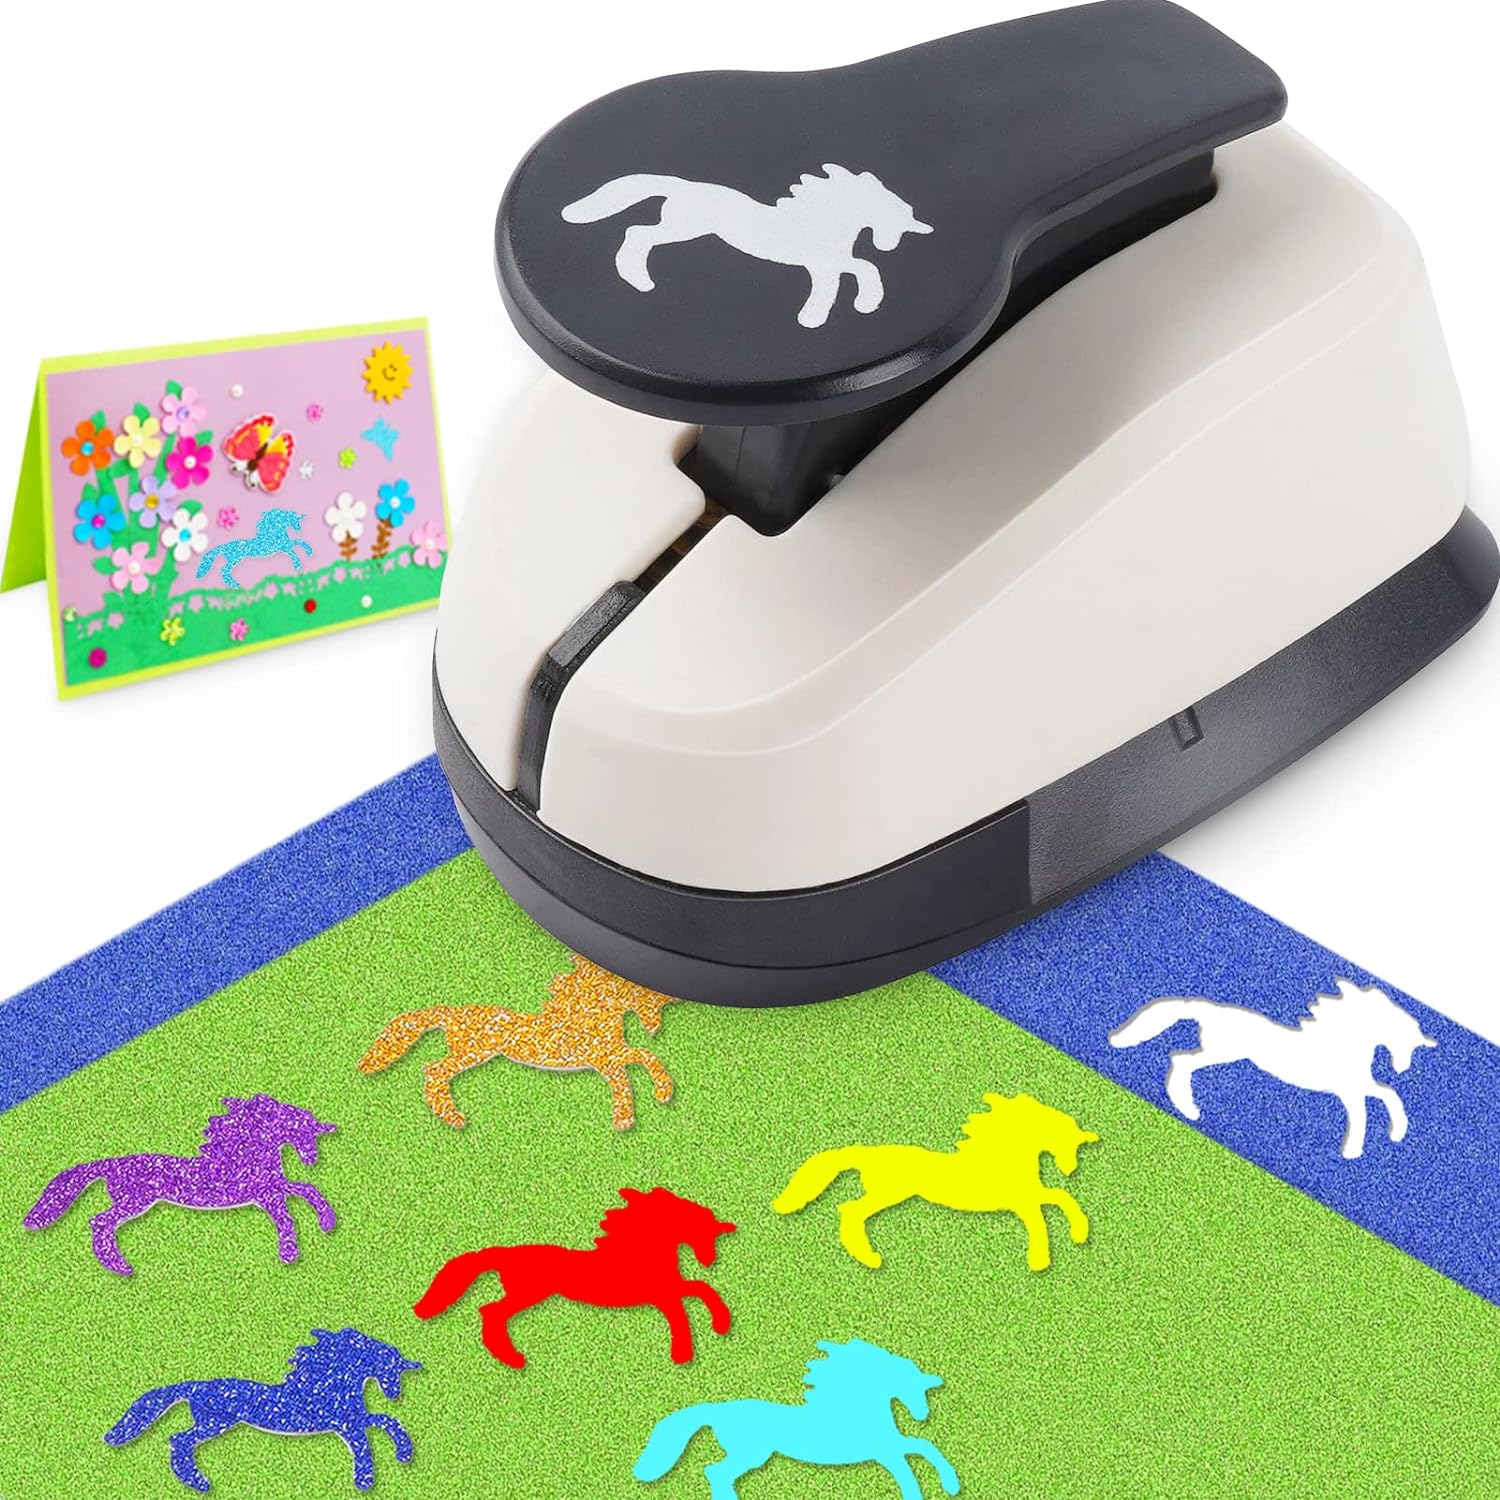 Generic Hole Punch, Hole Puncher for Crafts, Unicorn Shape Hole Punch, Paper Punches for Crafting, Large Hole Punch, Craft Punch, Scrap